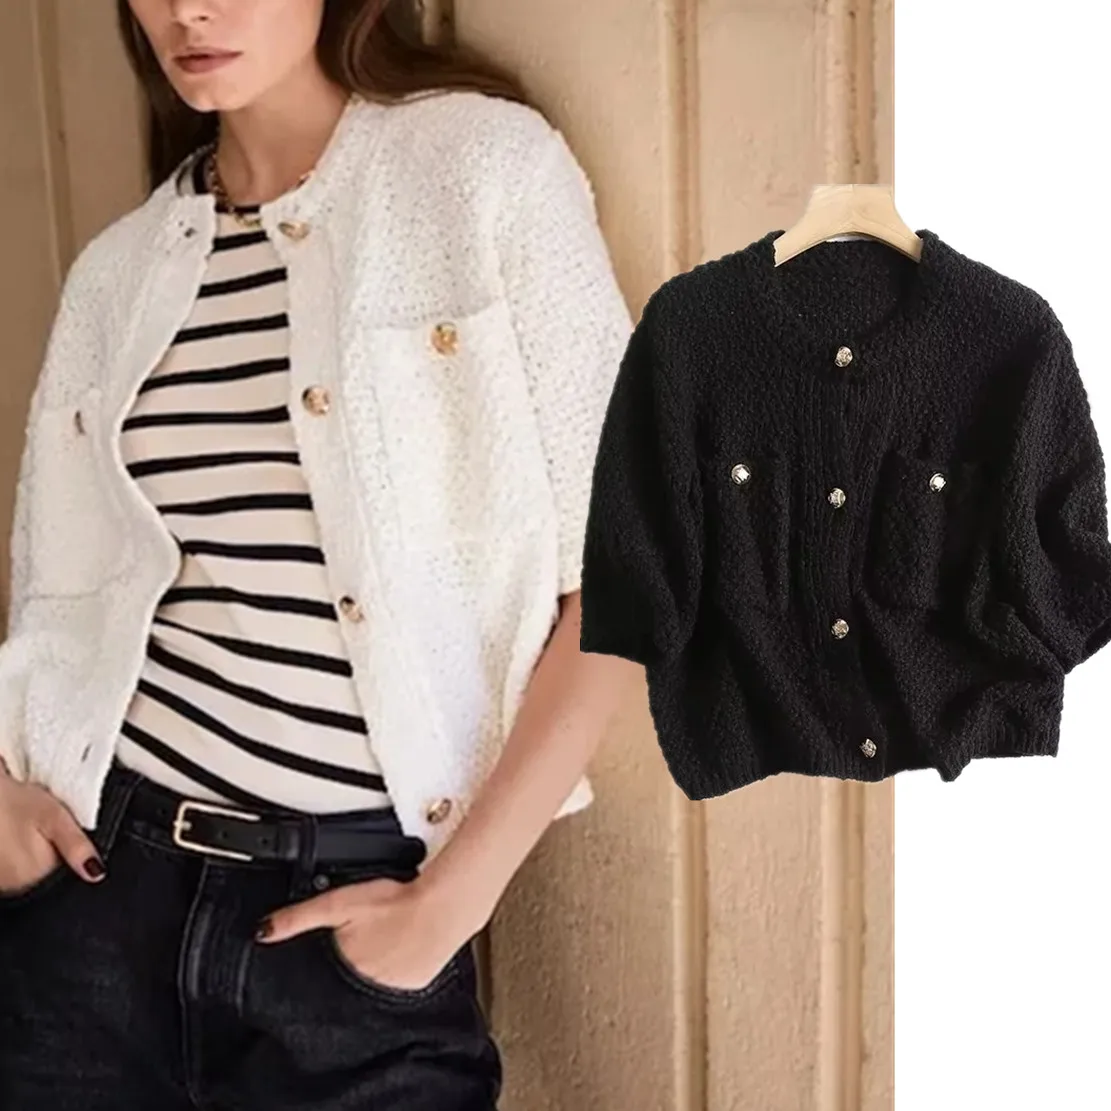 

Maxdutti Indie Folk Retro Knitted Sweaters Weave Single Breasted Gold Buttons Short Tops Casual Sweaters Cardigans Women